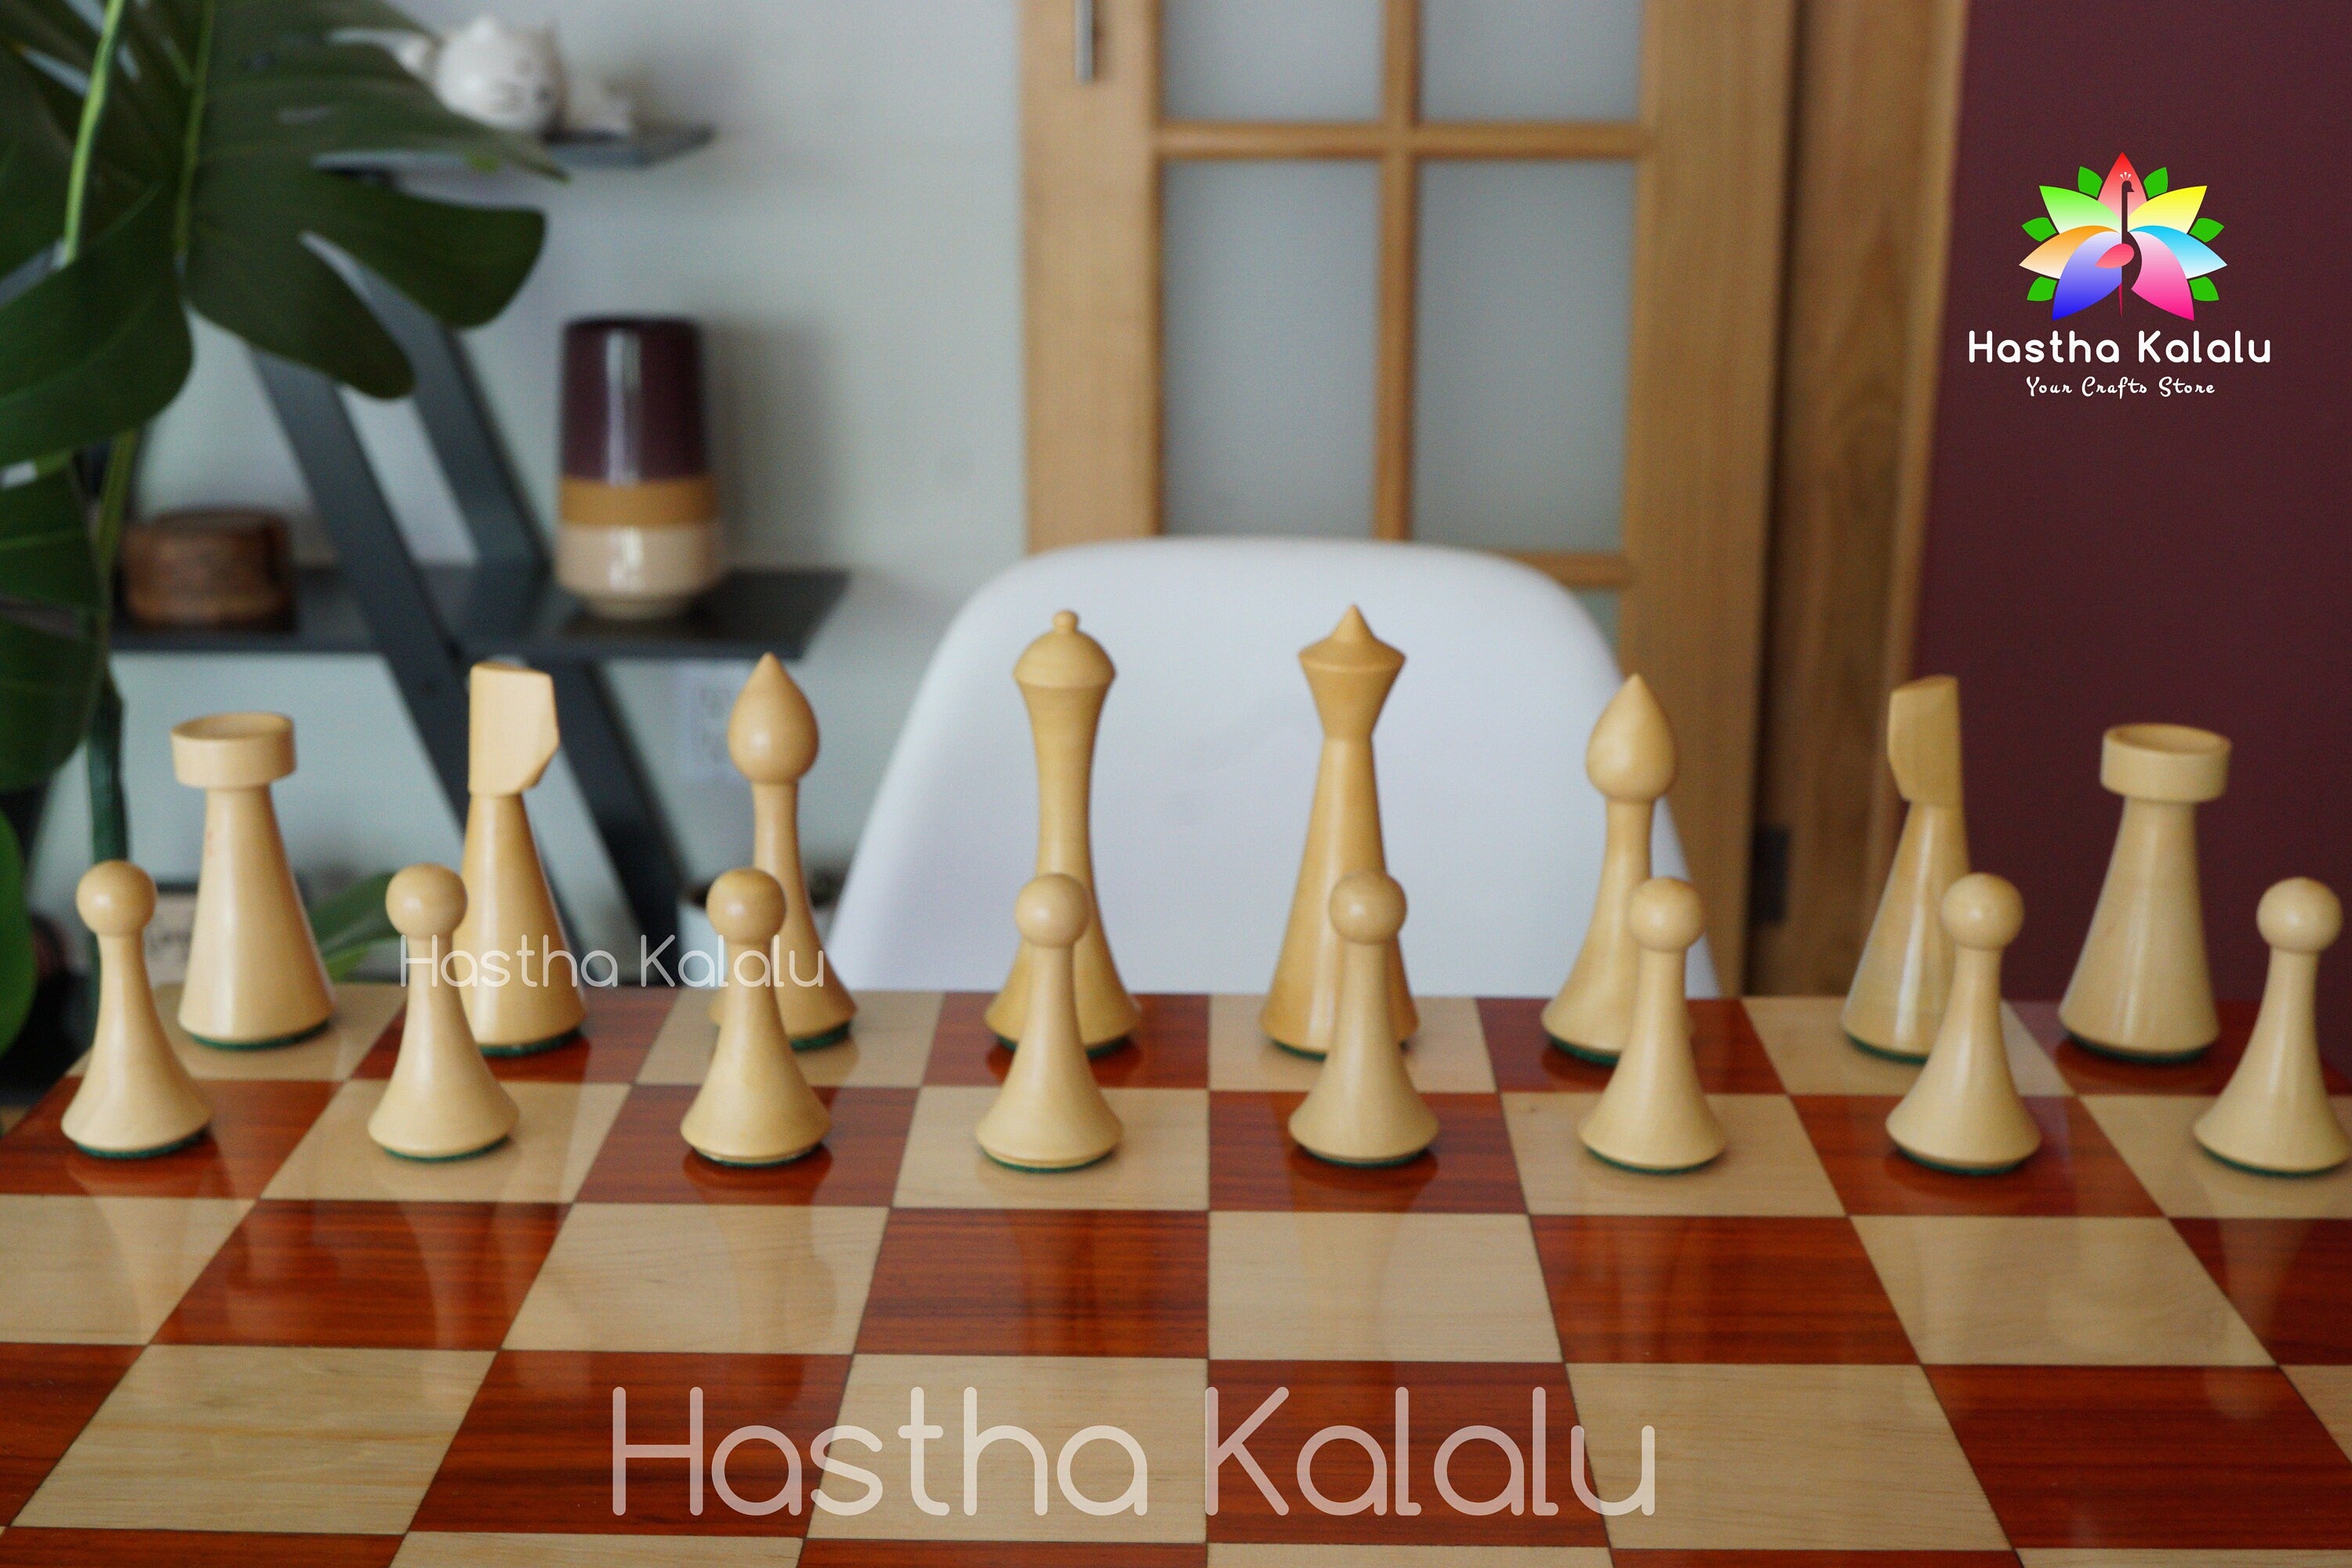 Minimalist Style Hermann Ohme Modern Chess set in Budrosewood and Boxw